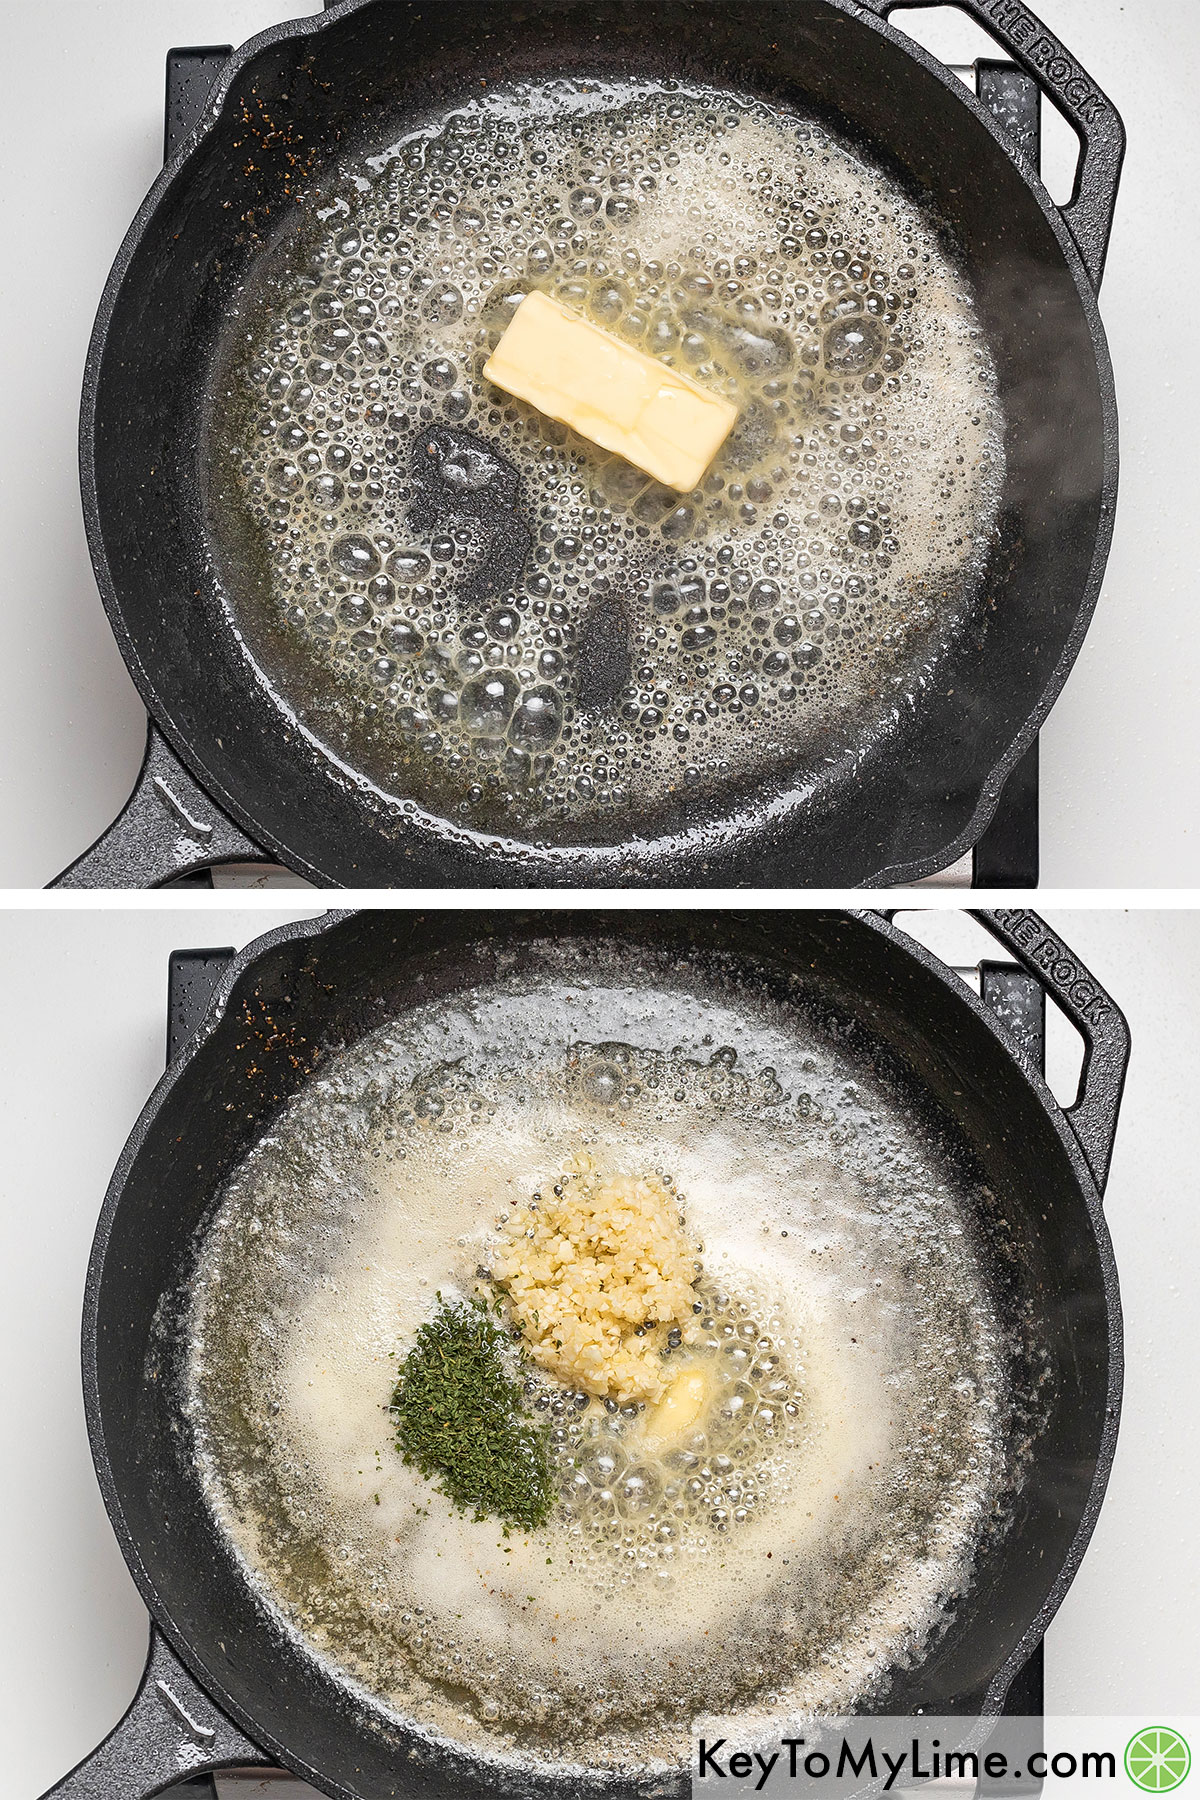 Melting butter in a hot skillet then mixing in garlic and parsley.